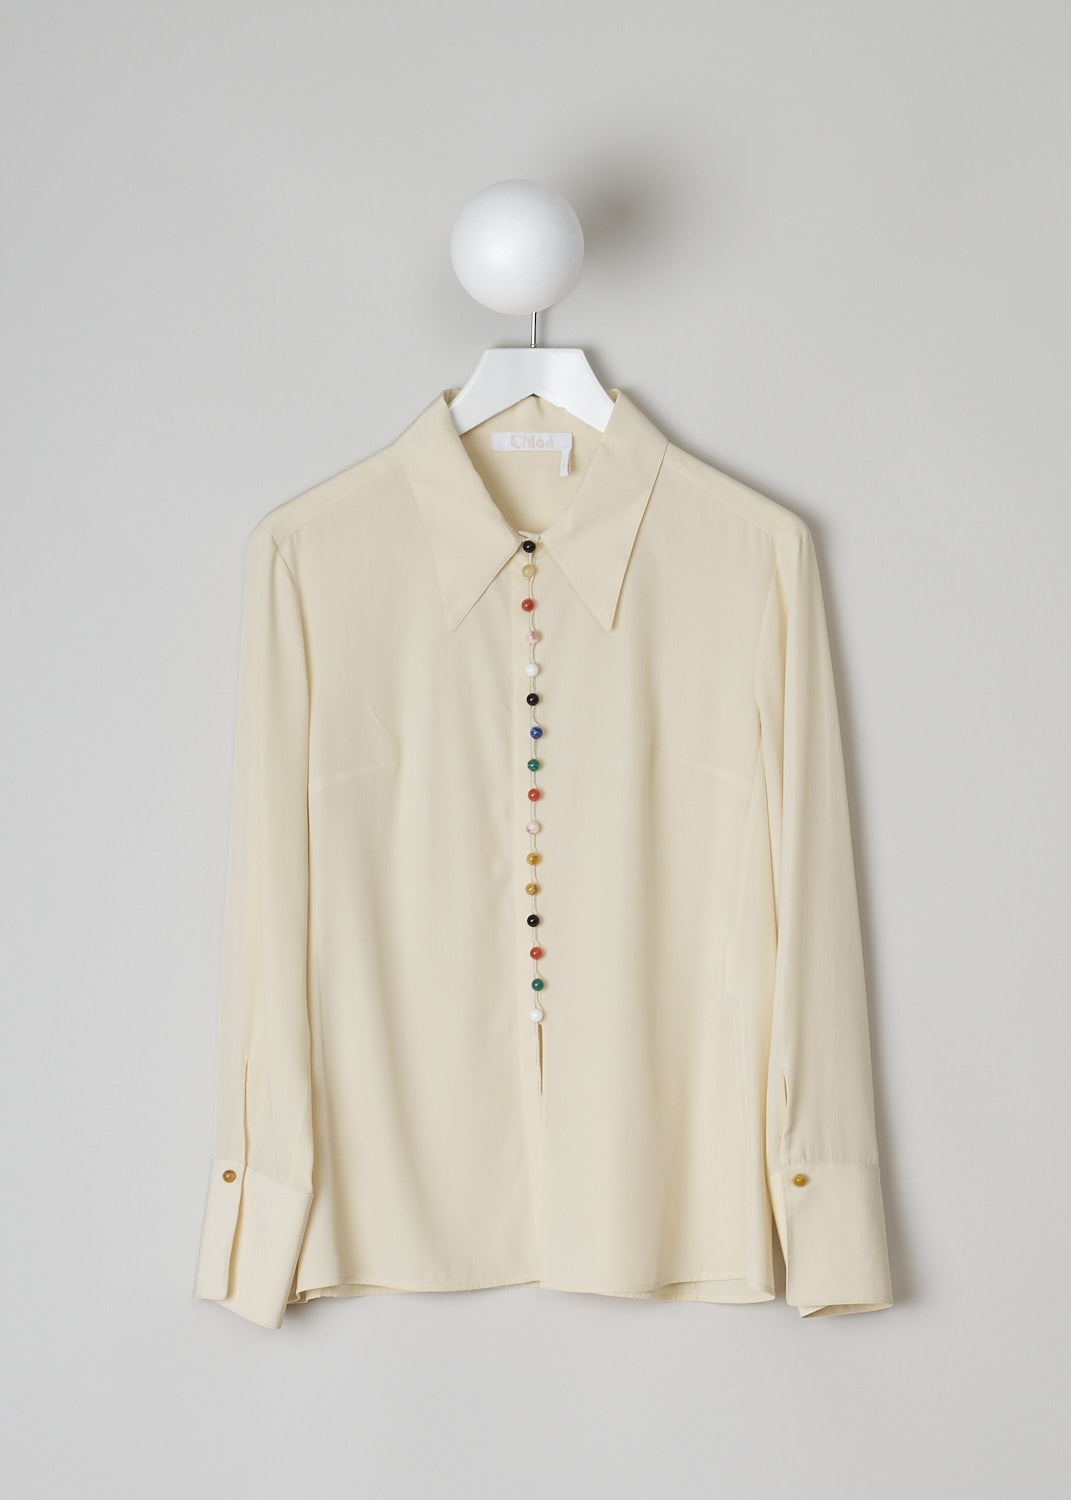 CHLOÉ, BEIGE BLOUSE WITH MULTICOLORED BEAD BUTTONS, CHC22SHT2900524T_SEED_PEARL_BEIGE, Beige, Front, This light beige blouse features a pointed collar and has a front button closure with resin-based bead buttons in various colors. Those same bead buttons can be found on the cuffs. The blouse has a straight hem with a centre slit in the front. 
